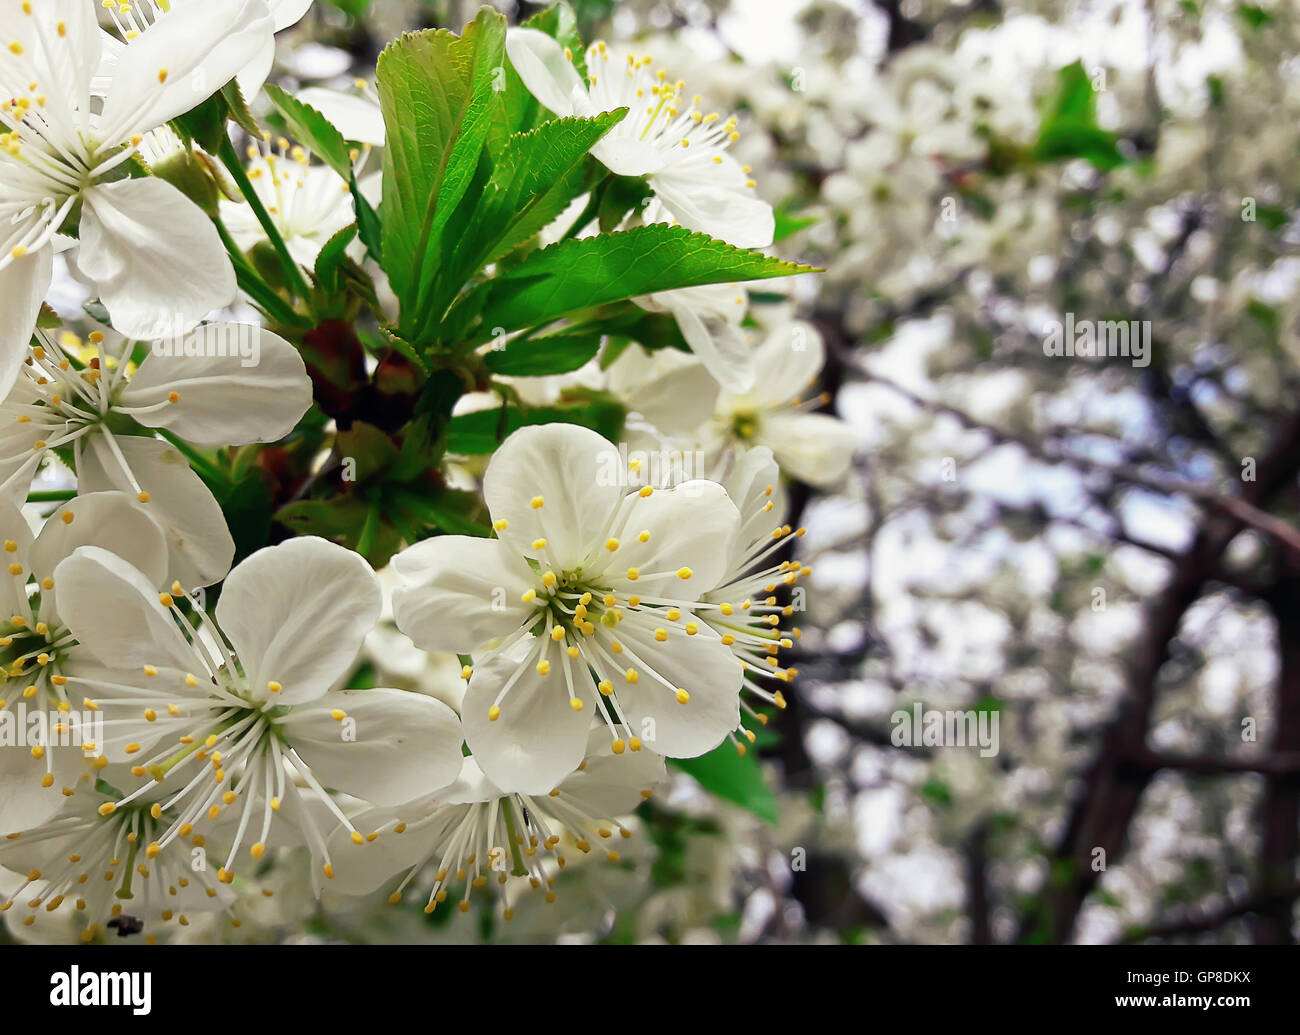 Branch of a blossoming tree with beautiful white flowers Stock Photo